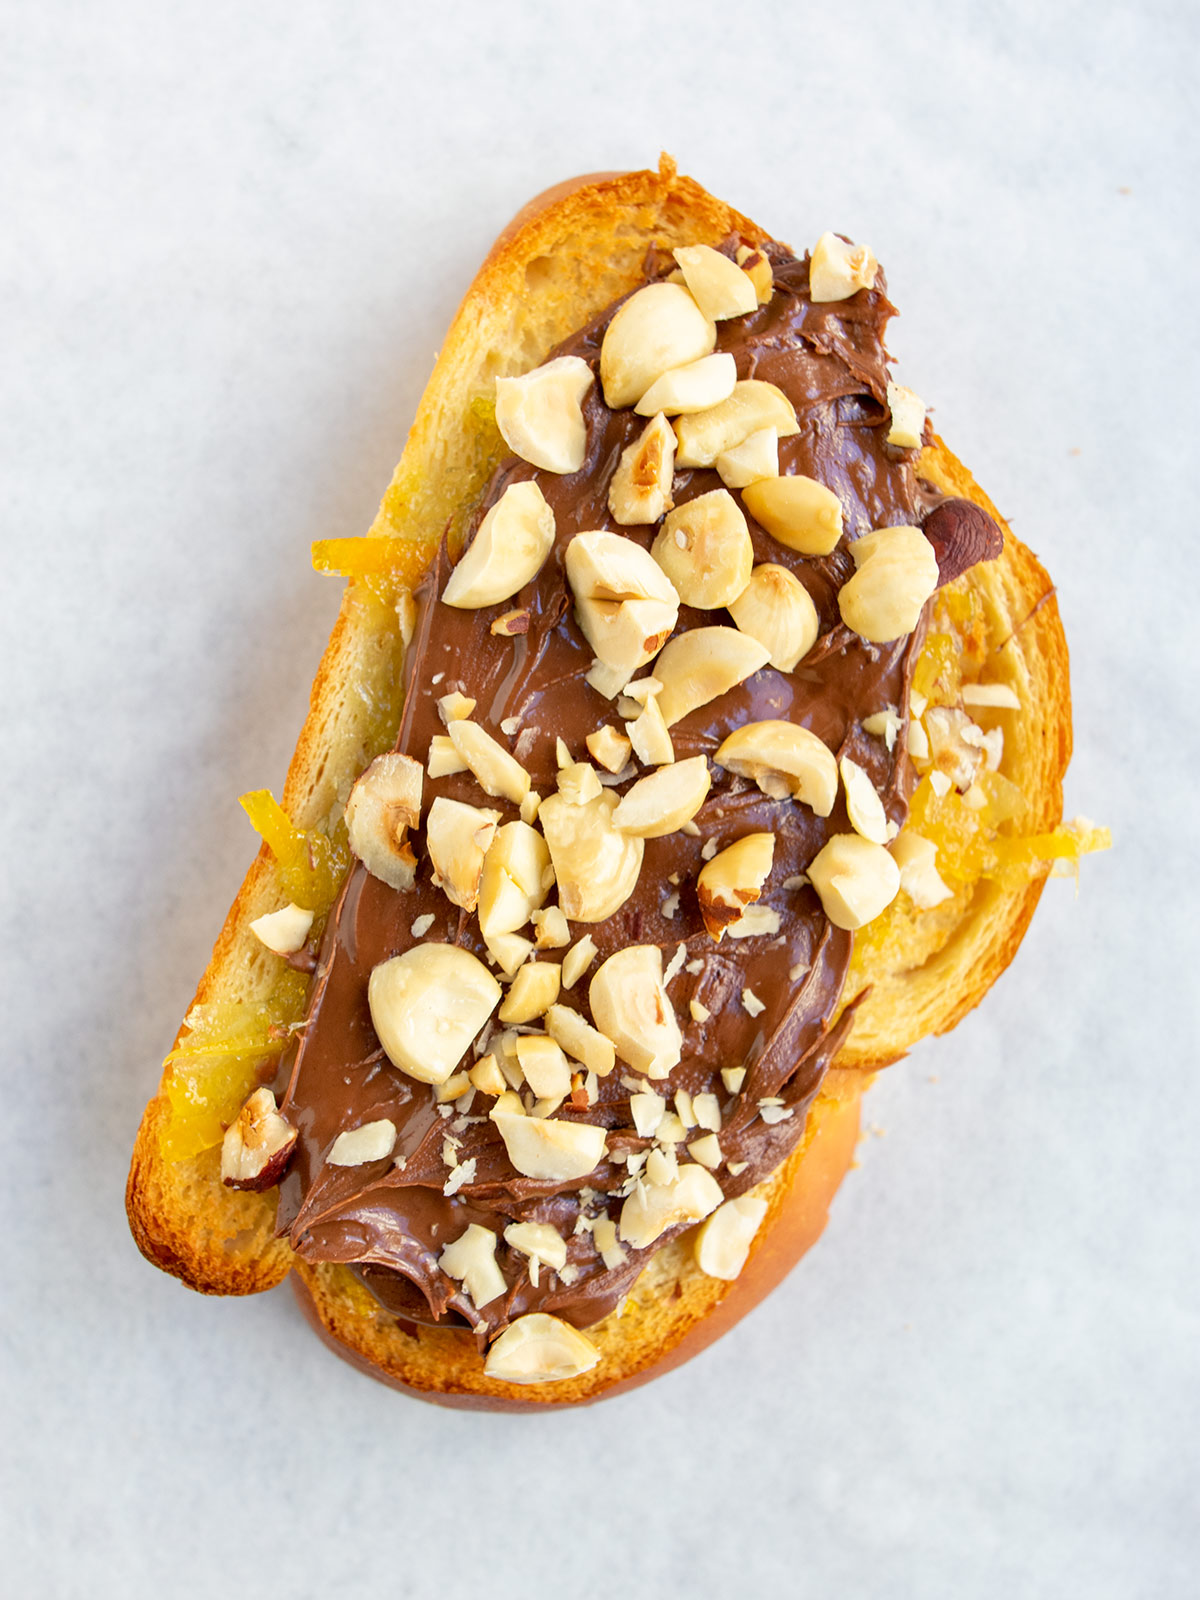 Close up of nutella tartine with orange marmalade and nutella and hazelnuts on challah toast.